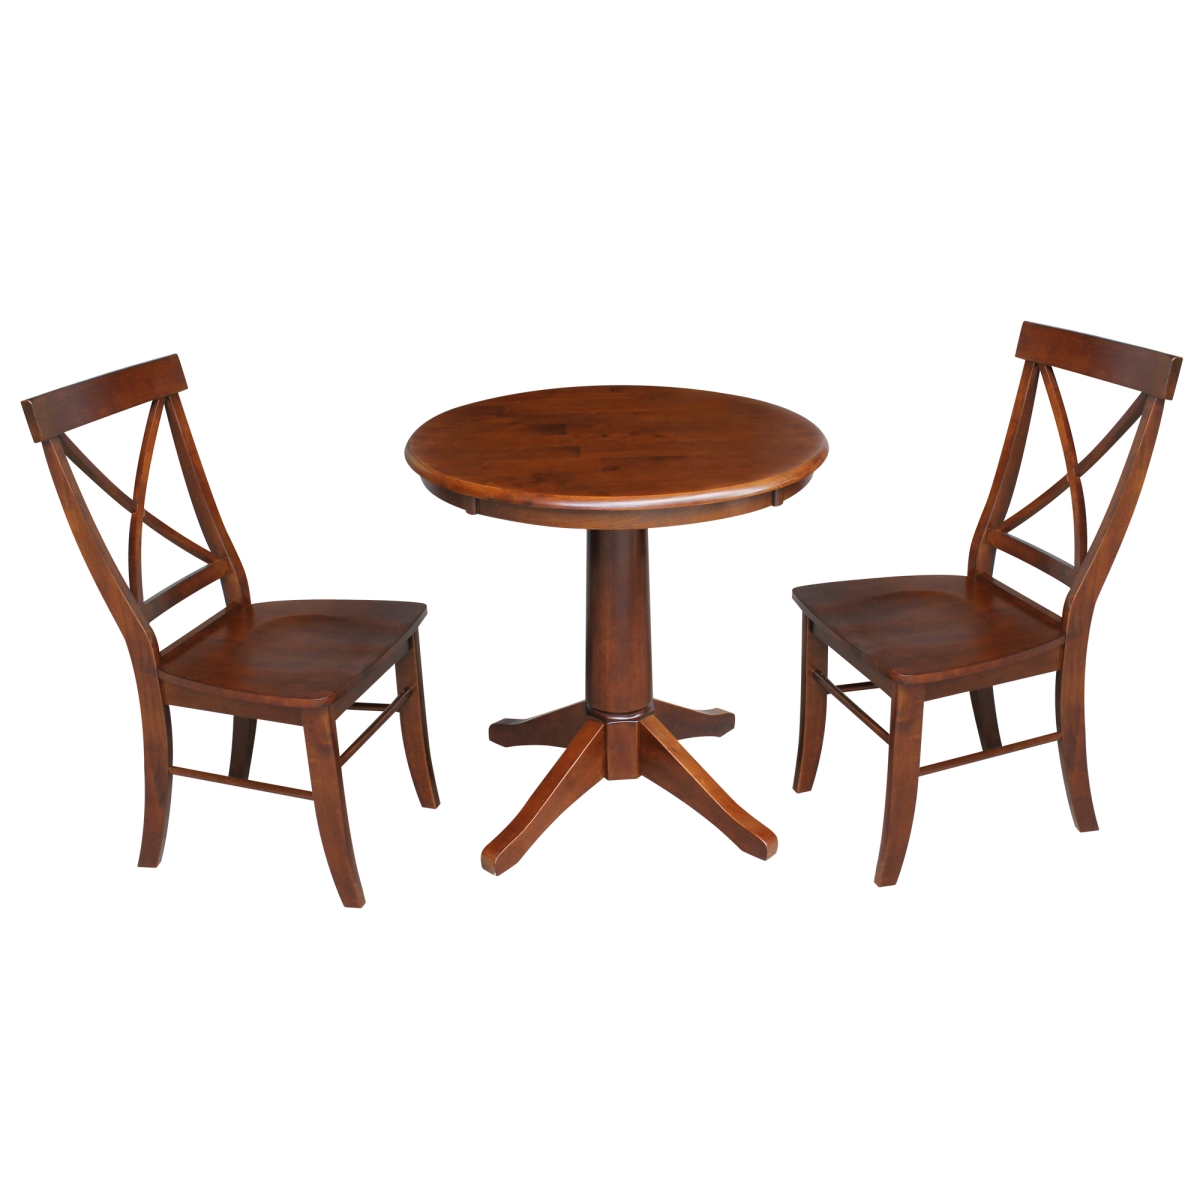 K581-30rt-27b-c613-2 30 In. Round Top Pedestal Table With 2 Chairs, Espresso - 3 Piece